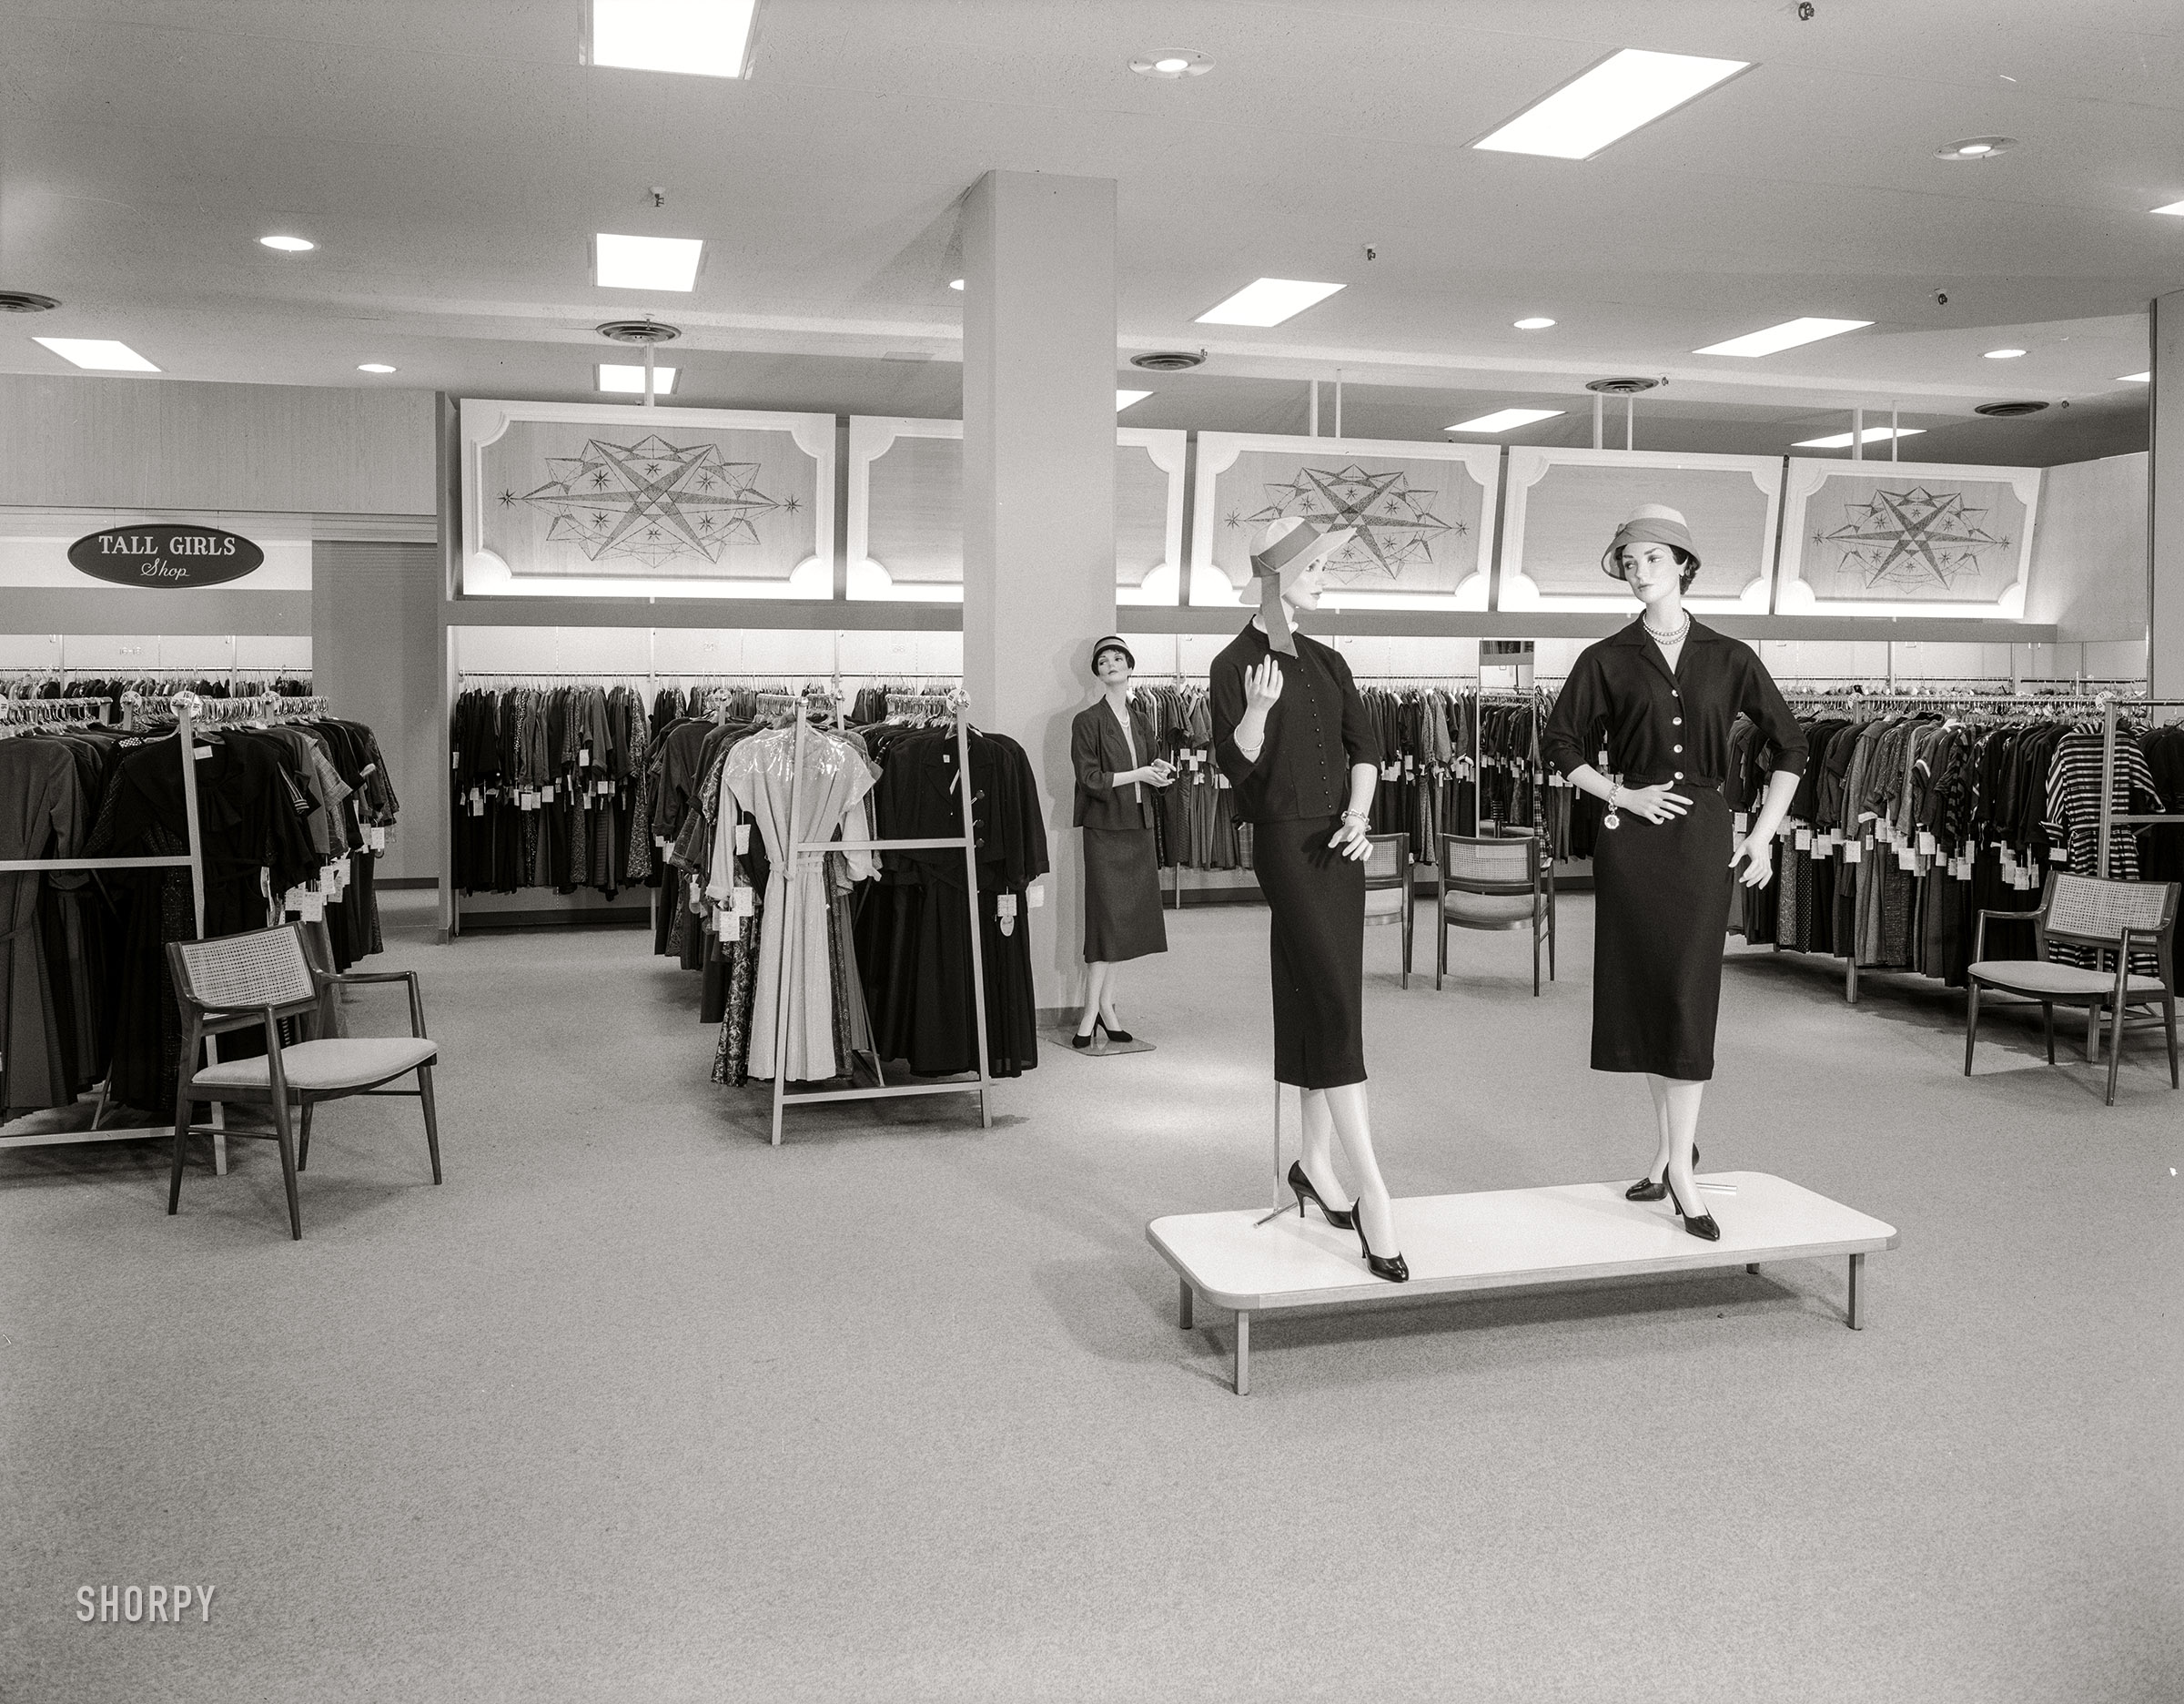 October 8, 1957. "Filene's department store, North Shore Shopping Center, Peabody, Massachusetts. Women's and misses' department. Raymond Loewy Associates, client." 4x5 inch acetate negative by Gottscho-Schleisner. View full size.